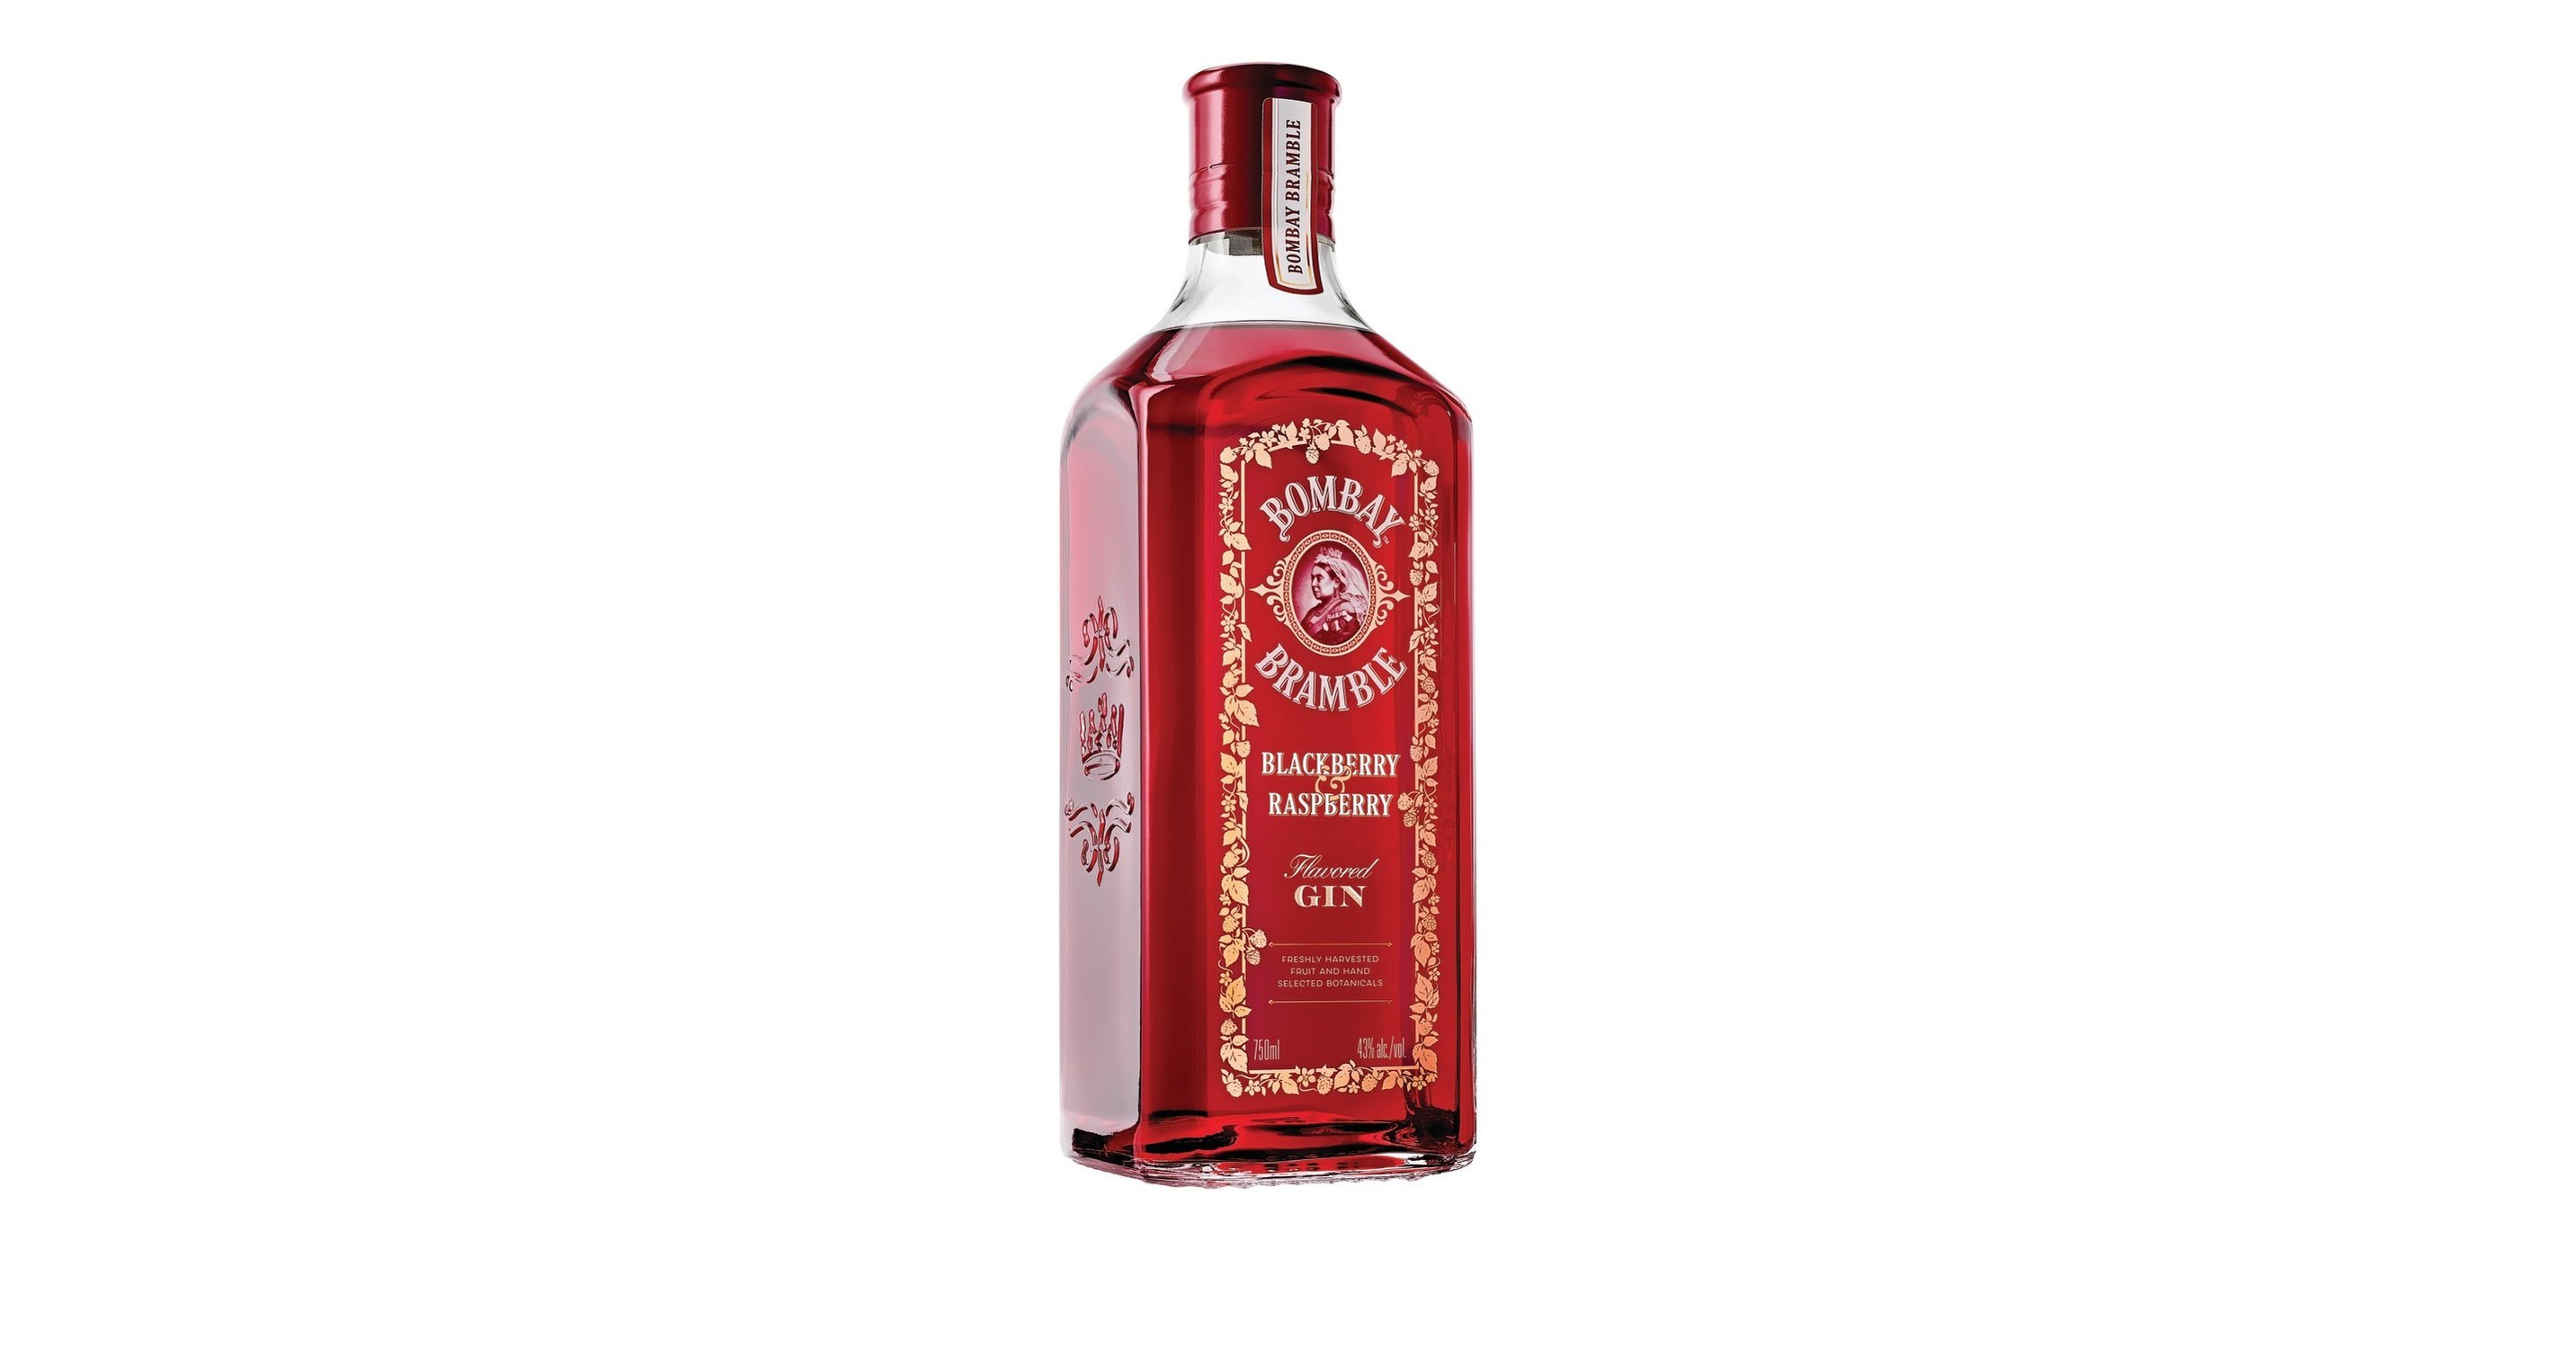 Introducing BOMBAY flavor new vibrant 100% harvested of gin freshly a natural raspberries bursting with and blackberries the BRAMBLE®